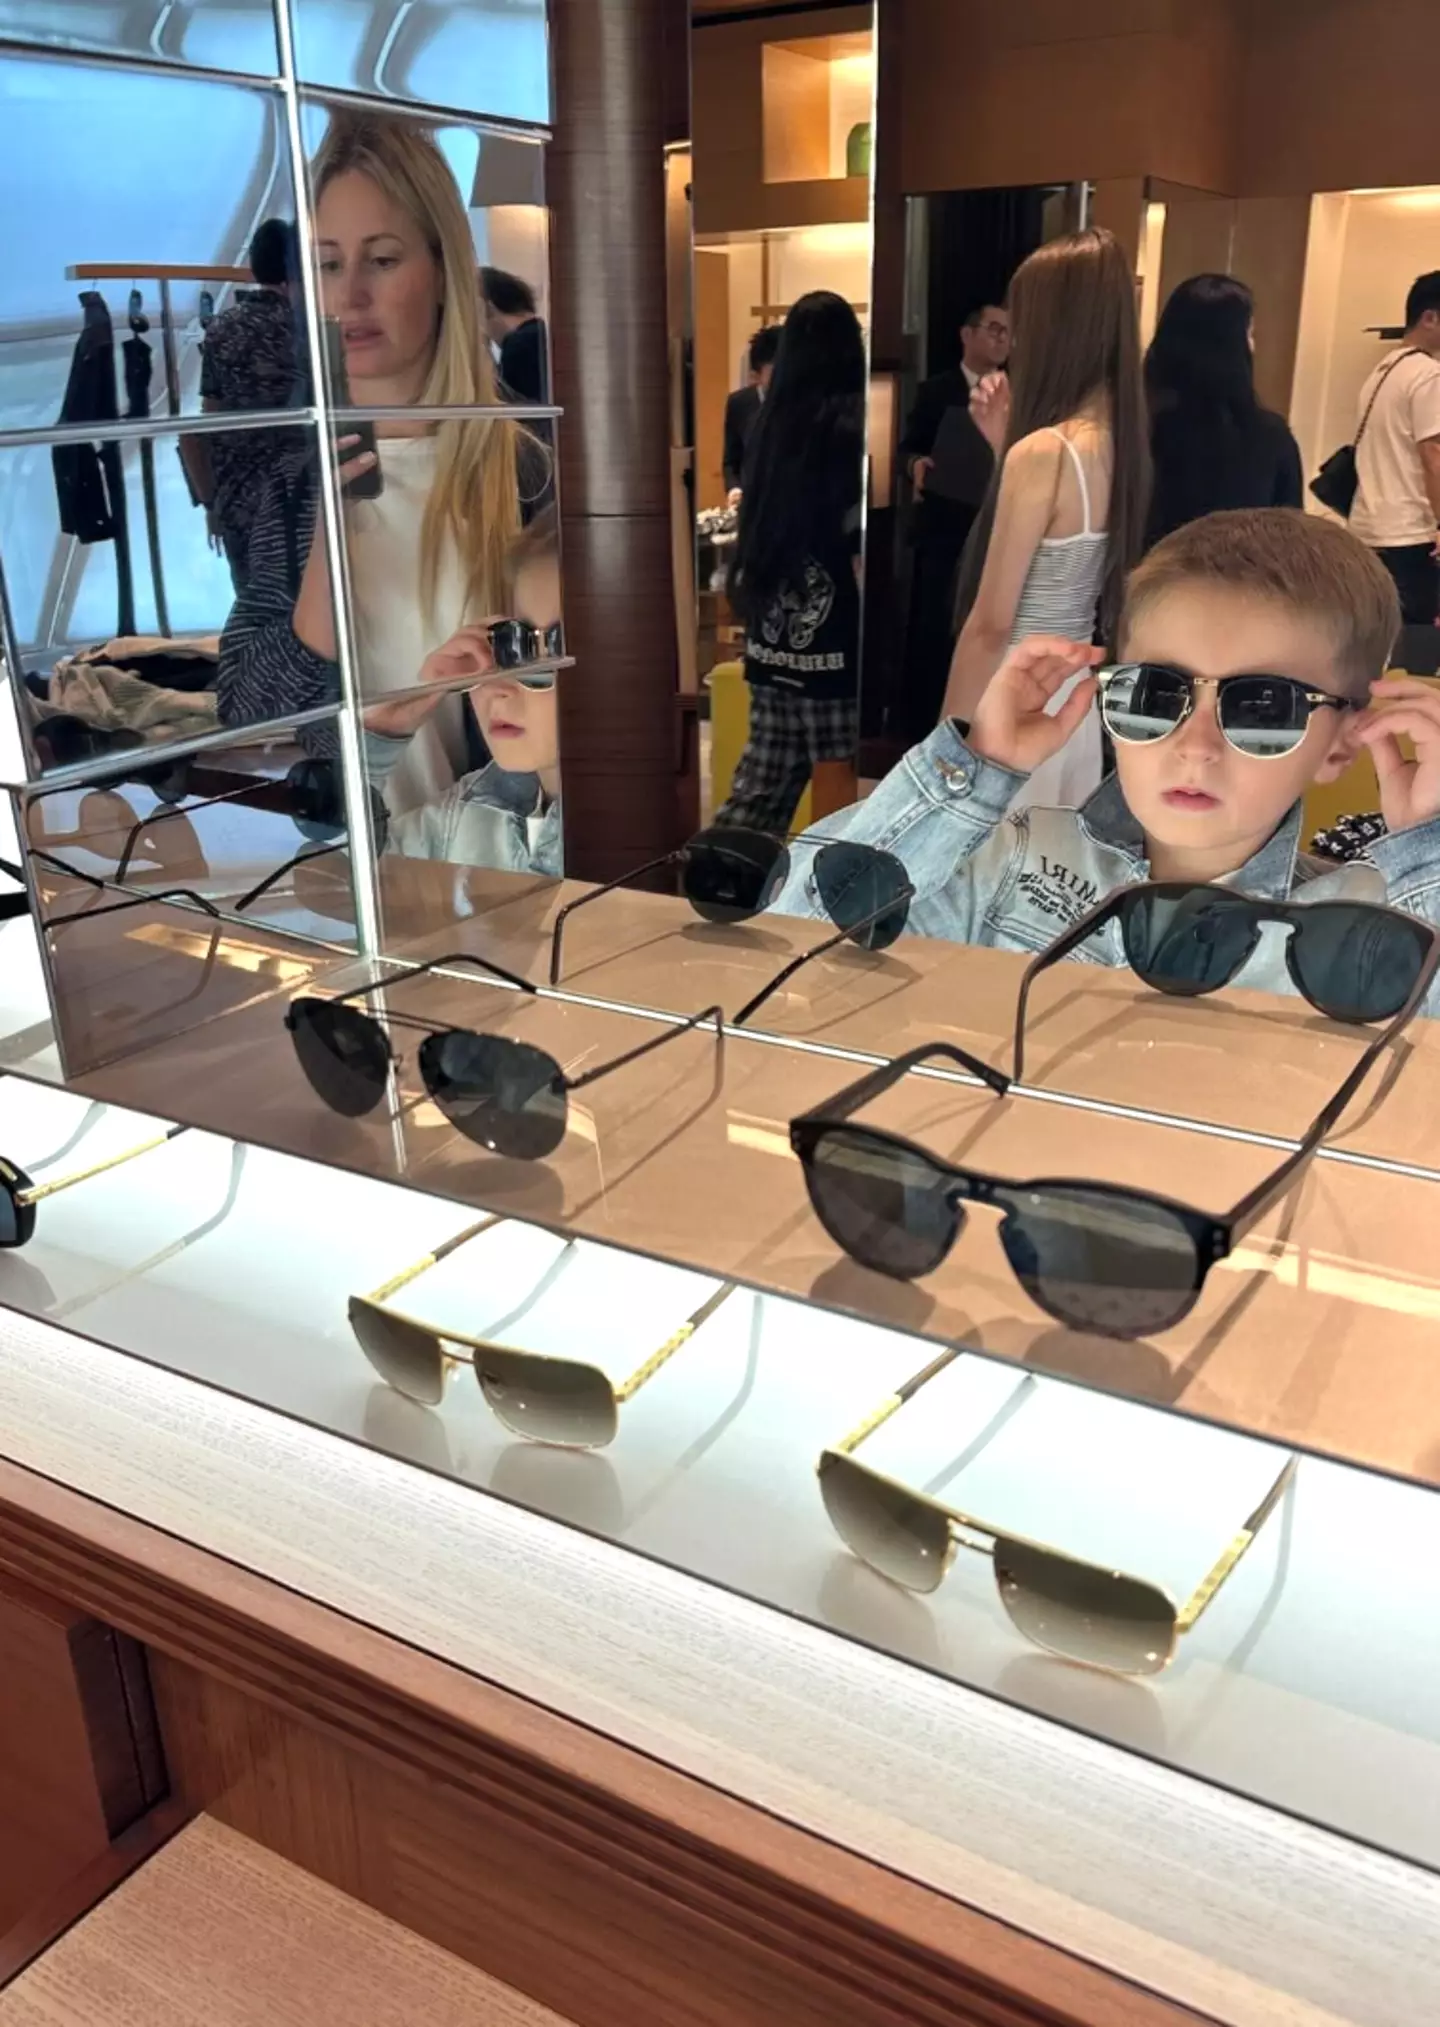 The little one was spotted in luxury stores.